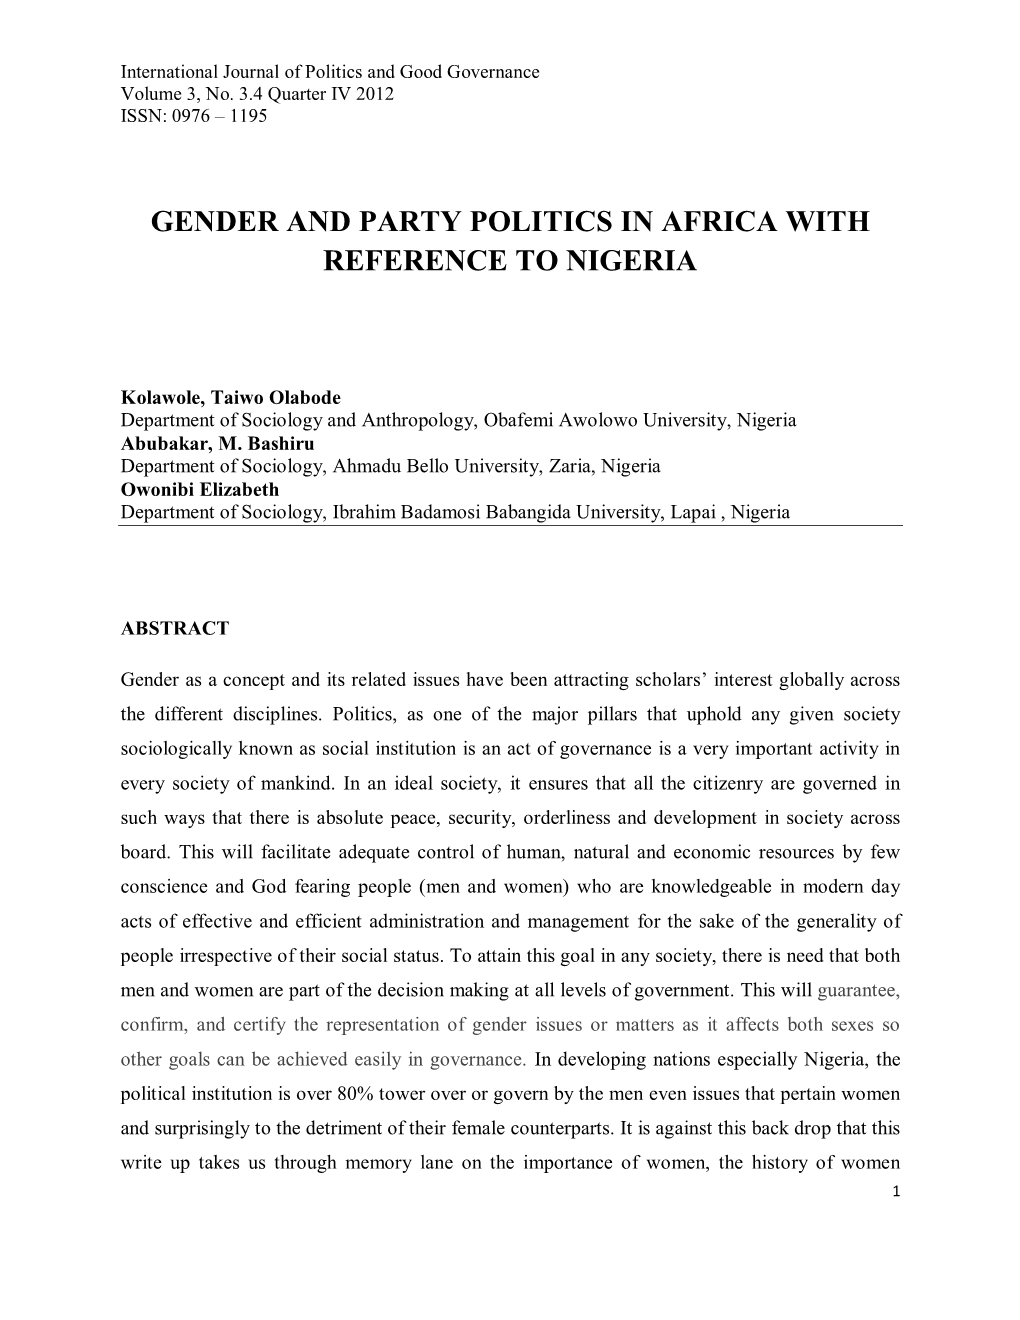 Gender and Party Politics in Africa with Reference to Nigeria